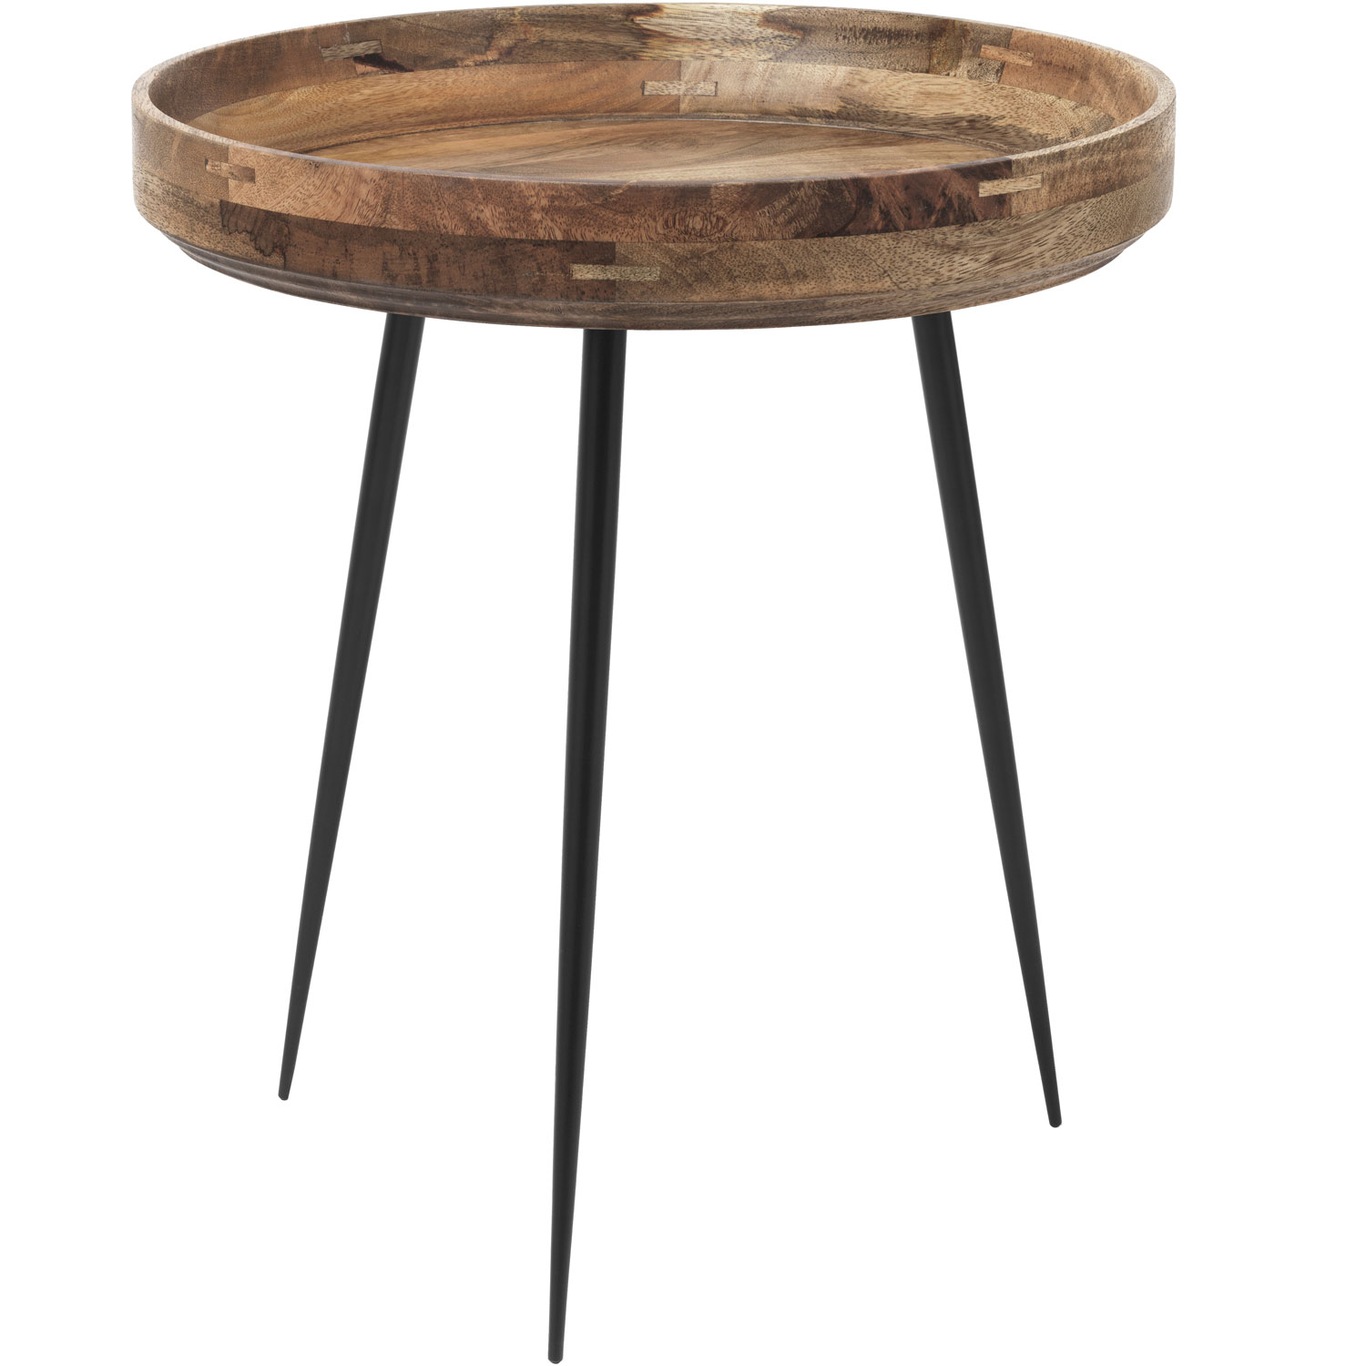 Bowl Coffee Table Natural Lacquered Mango Wood, 46 cm